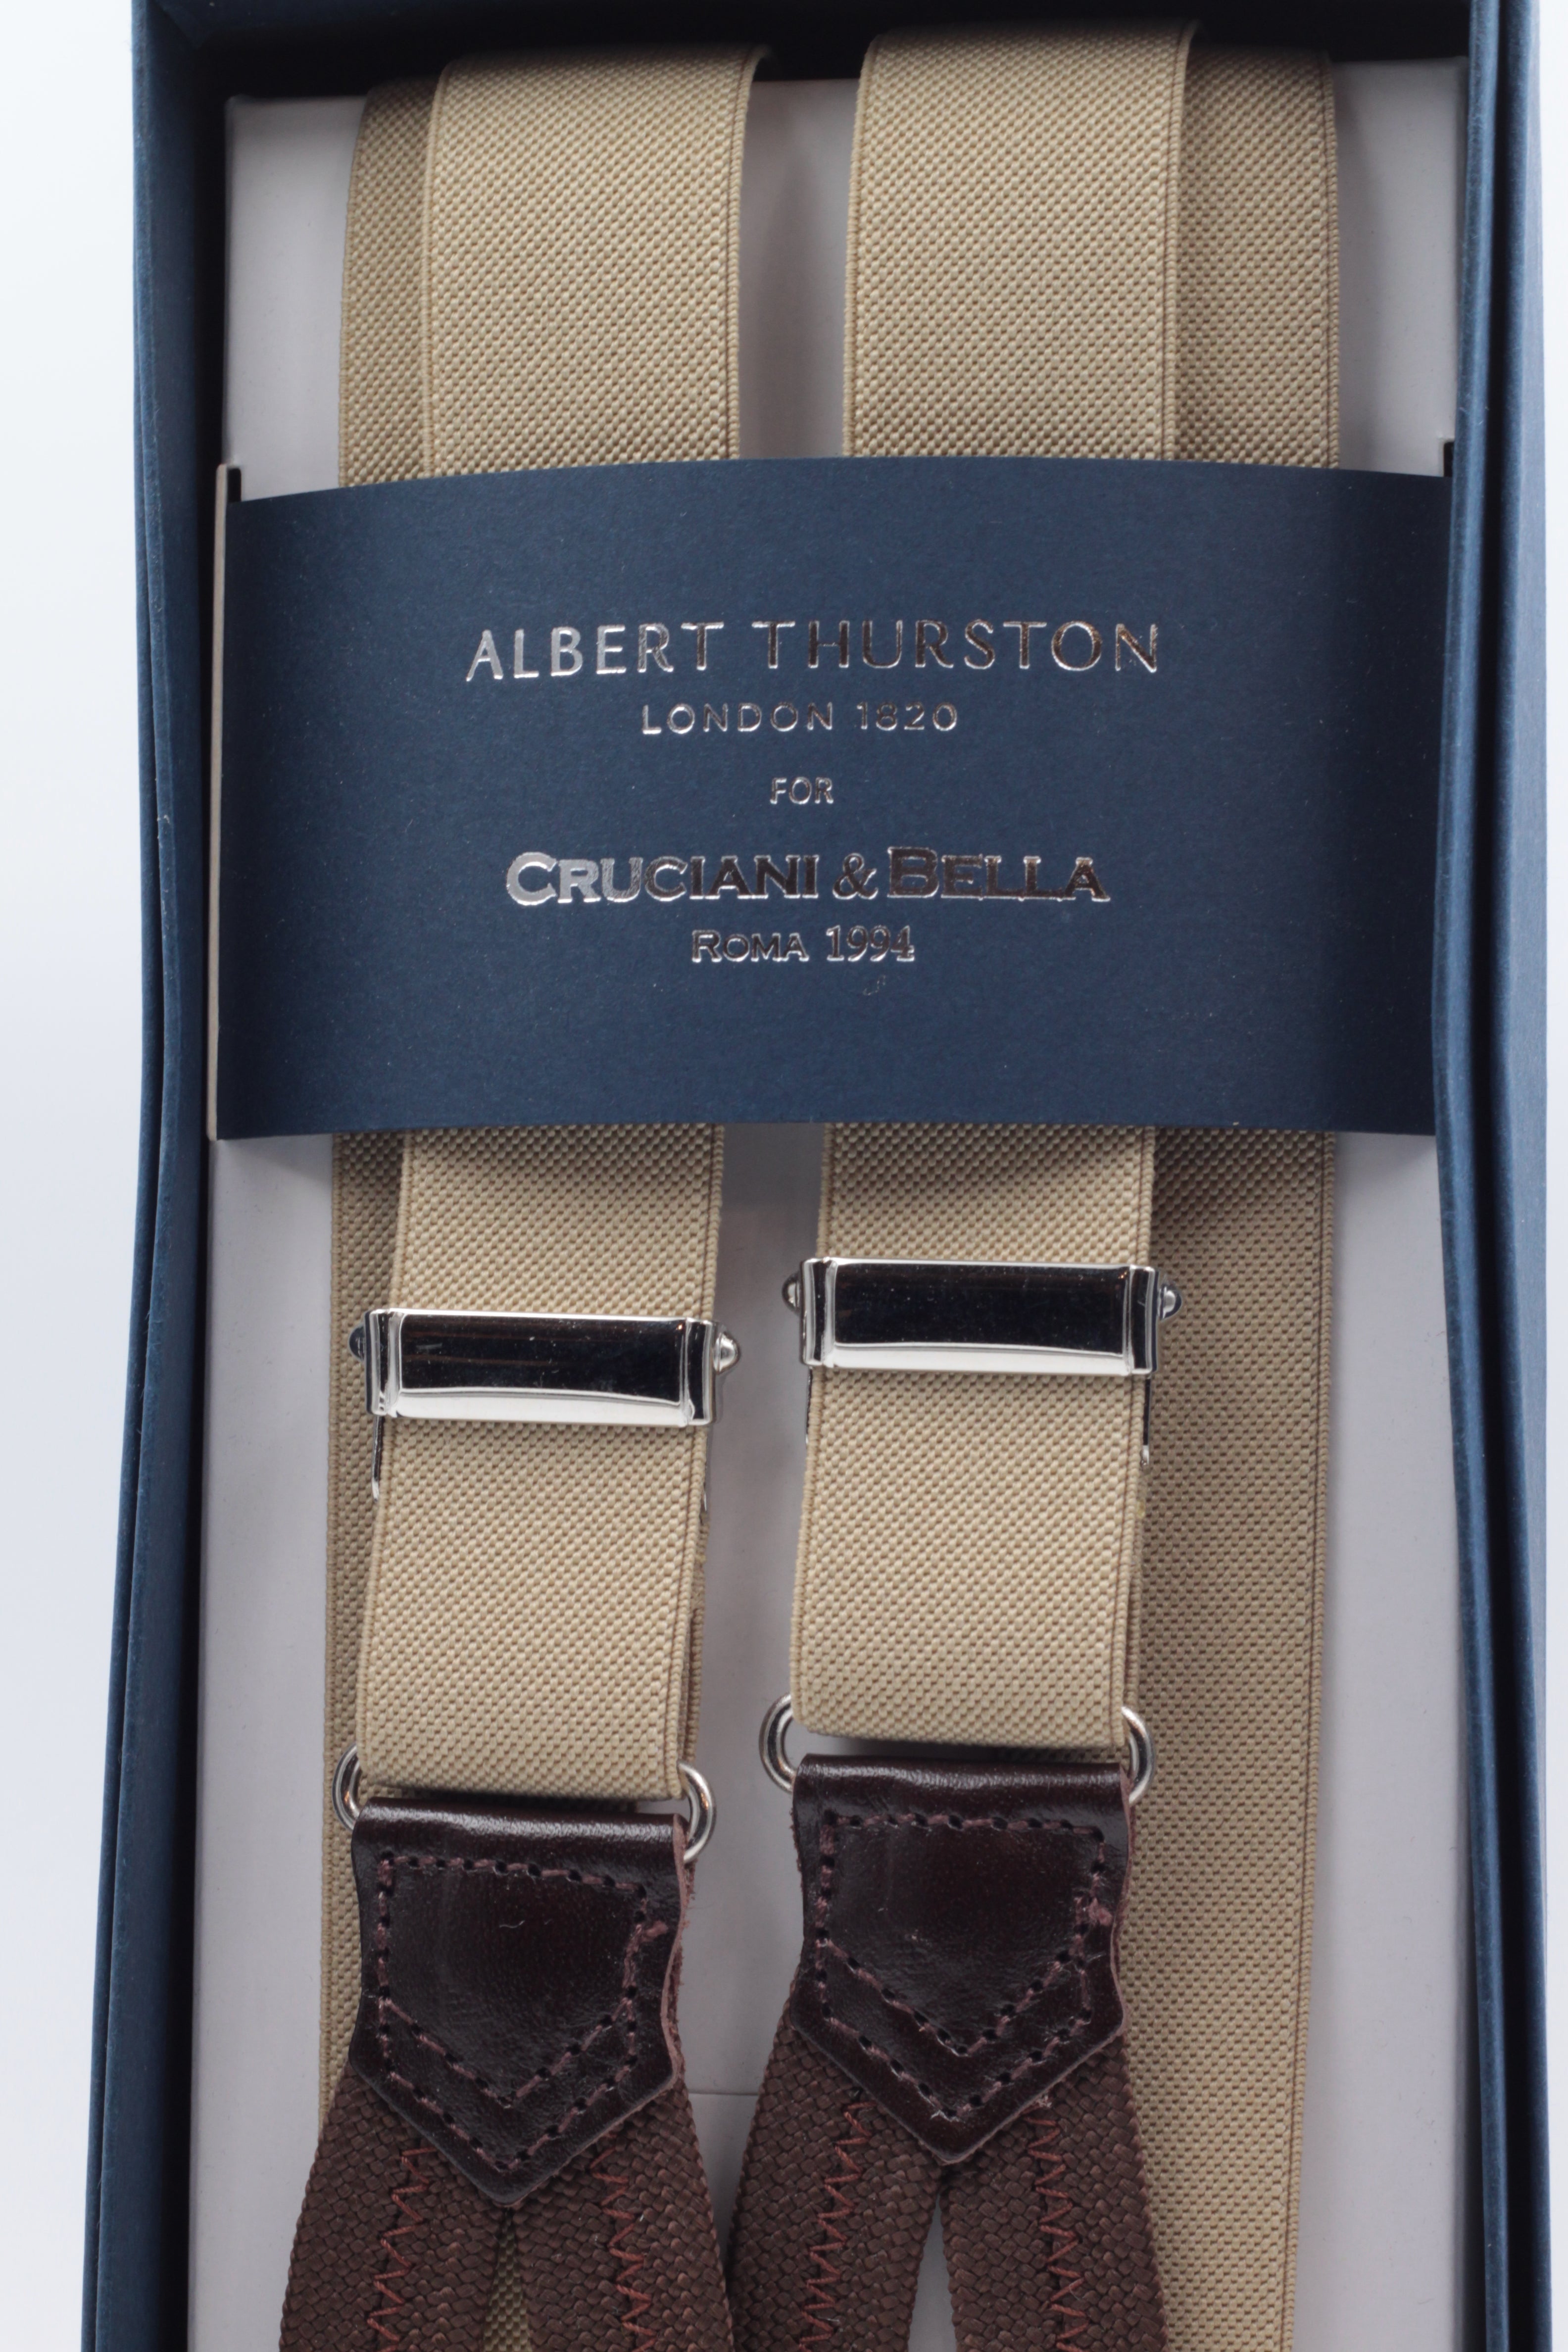 Albert Thurston for Cruciani & Bella Made in England Adjustable Sizing 25 mm elastic braces Beige plain Braid ends Y-Shaped Nickel Fittings Size: L